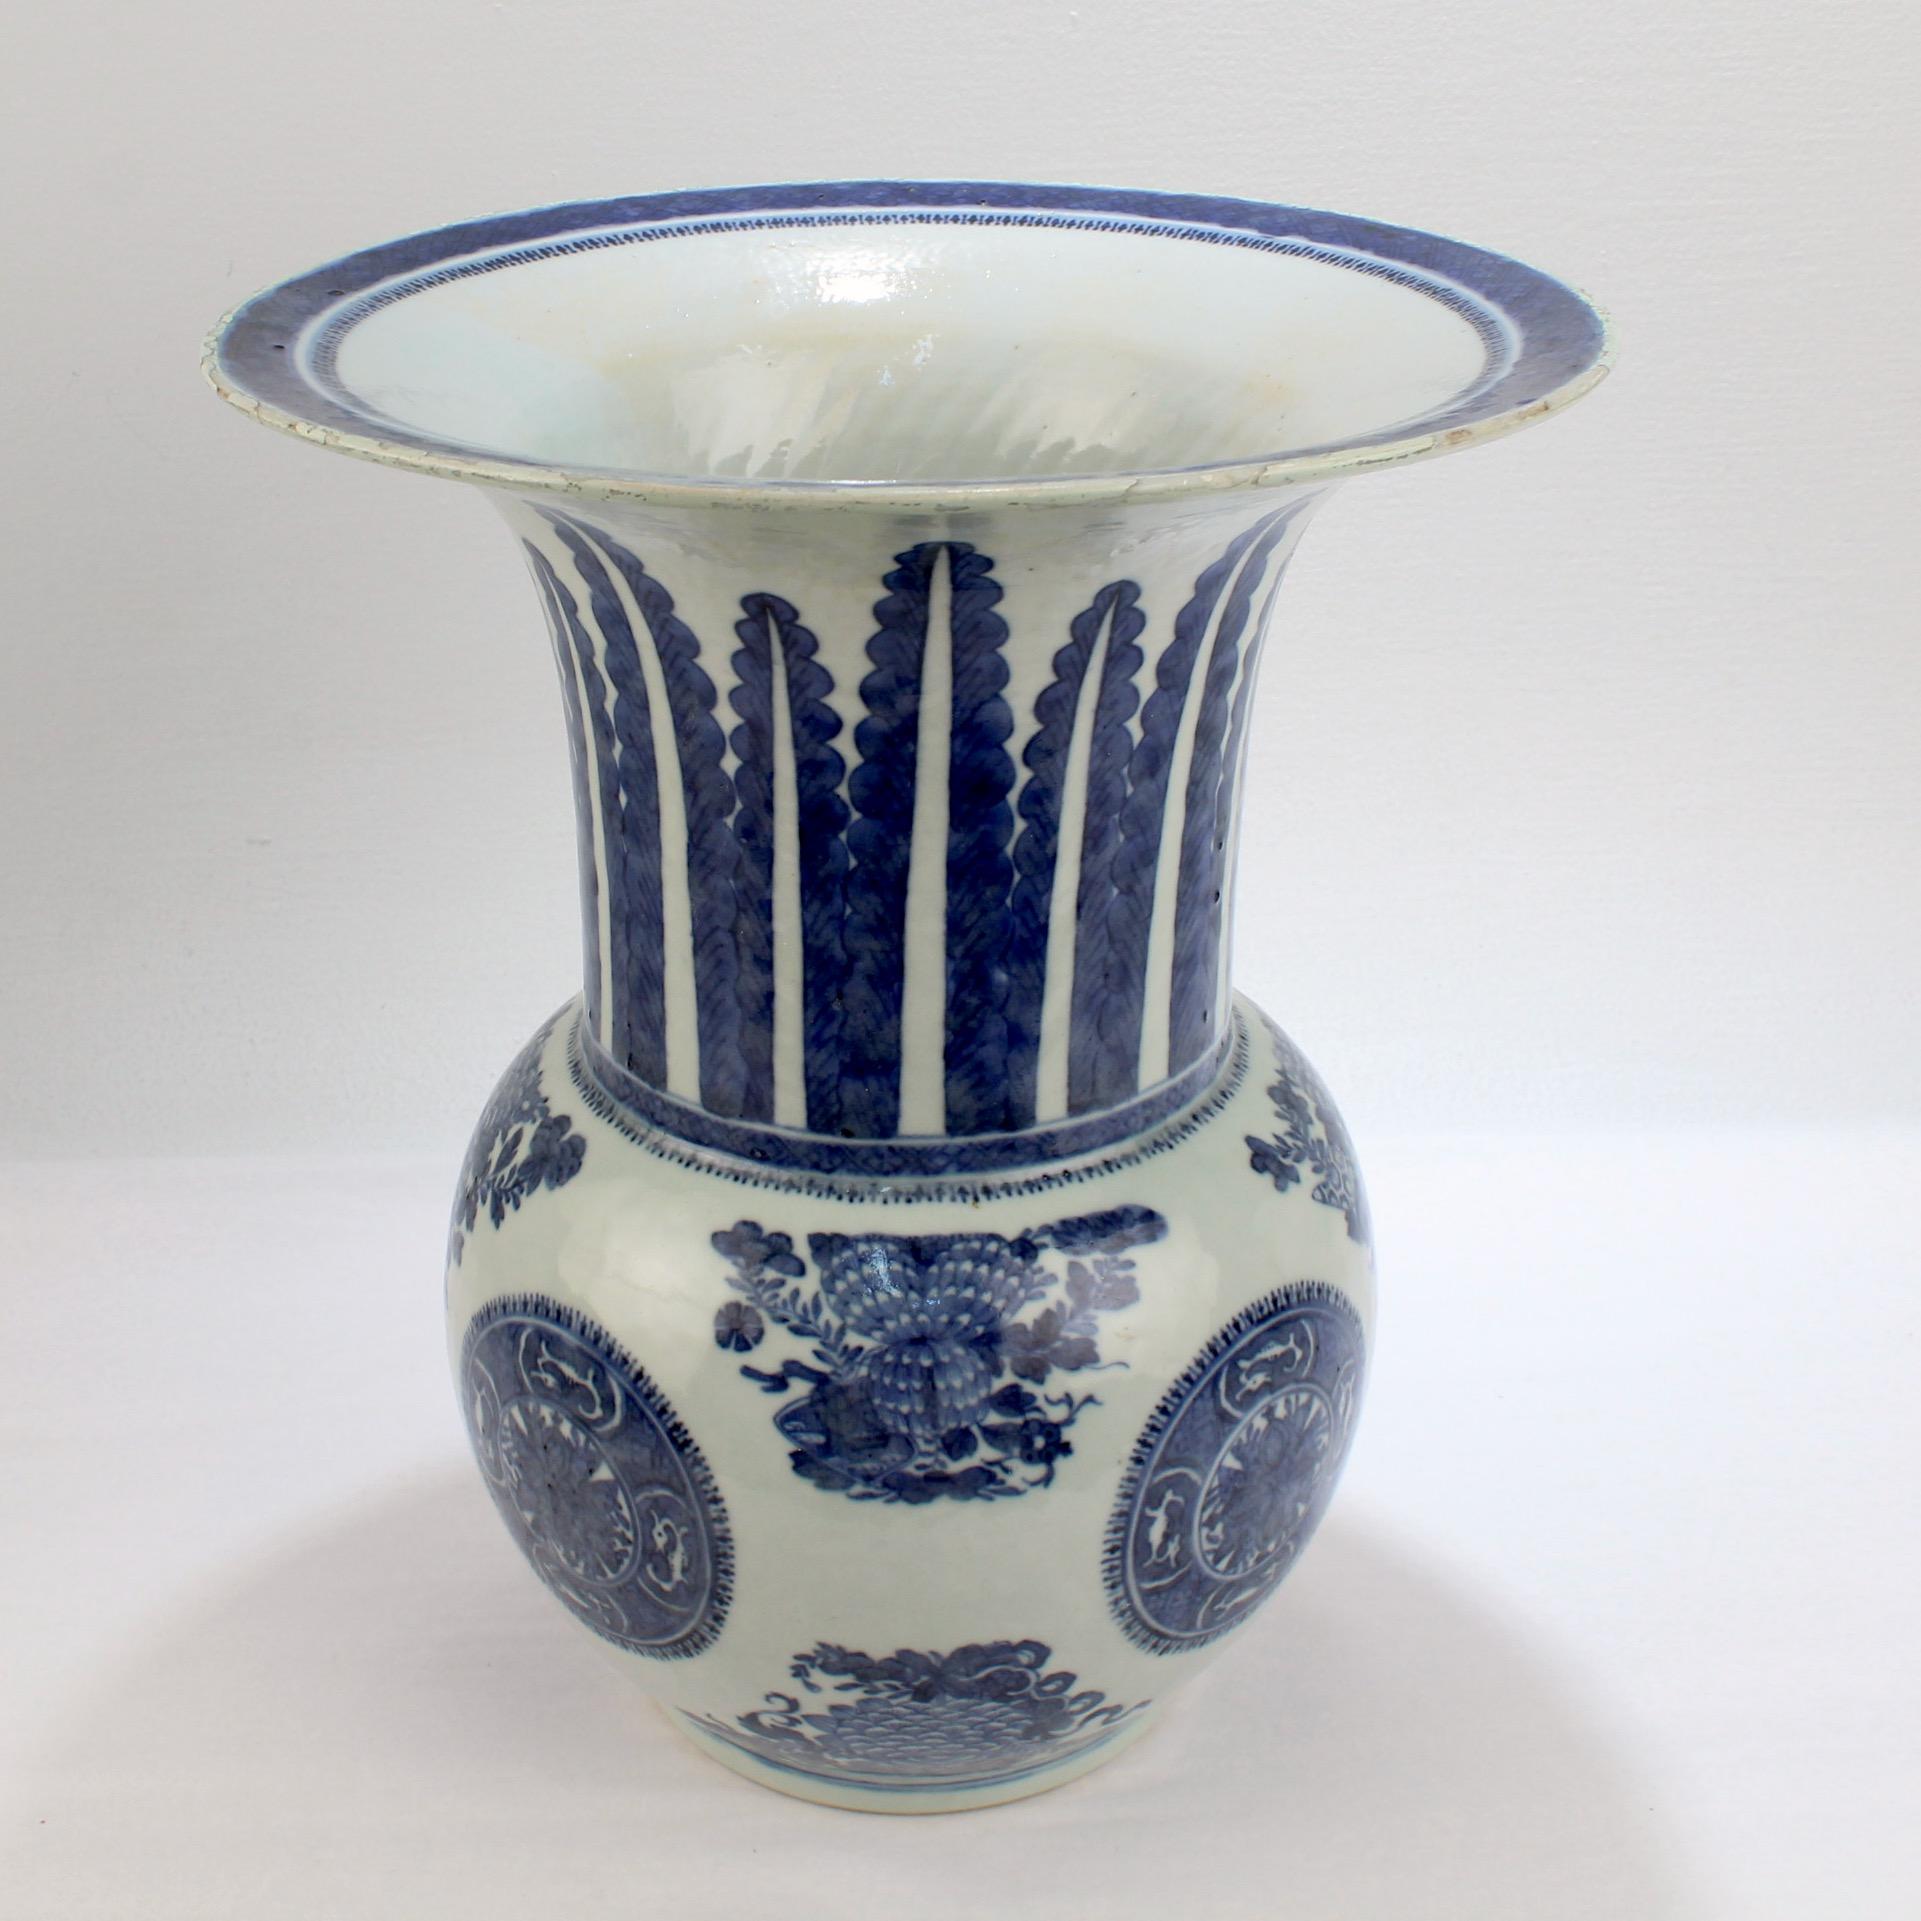 A fine antique Chinese export porcelain vase in the Fitzhugh pattern.

Decorated in underglaze blue with a trellis-diaper border with spearheads and dumb-bells to the rim, with fronds and the repeated trellis-diaper device to the neck, and with